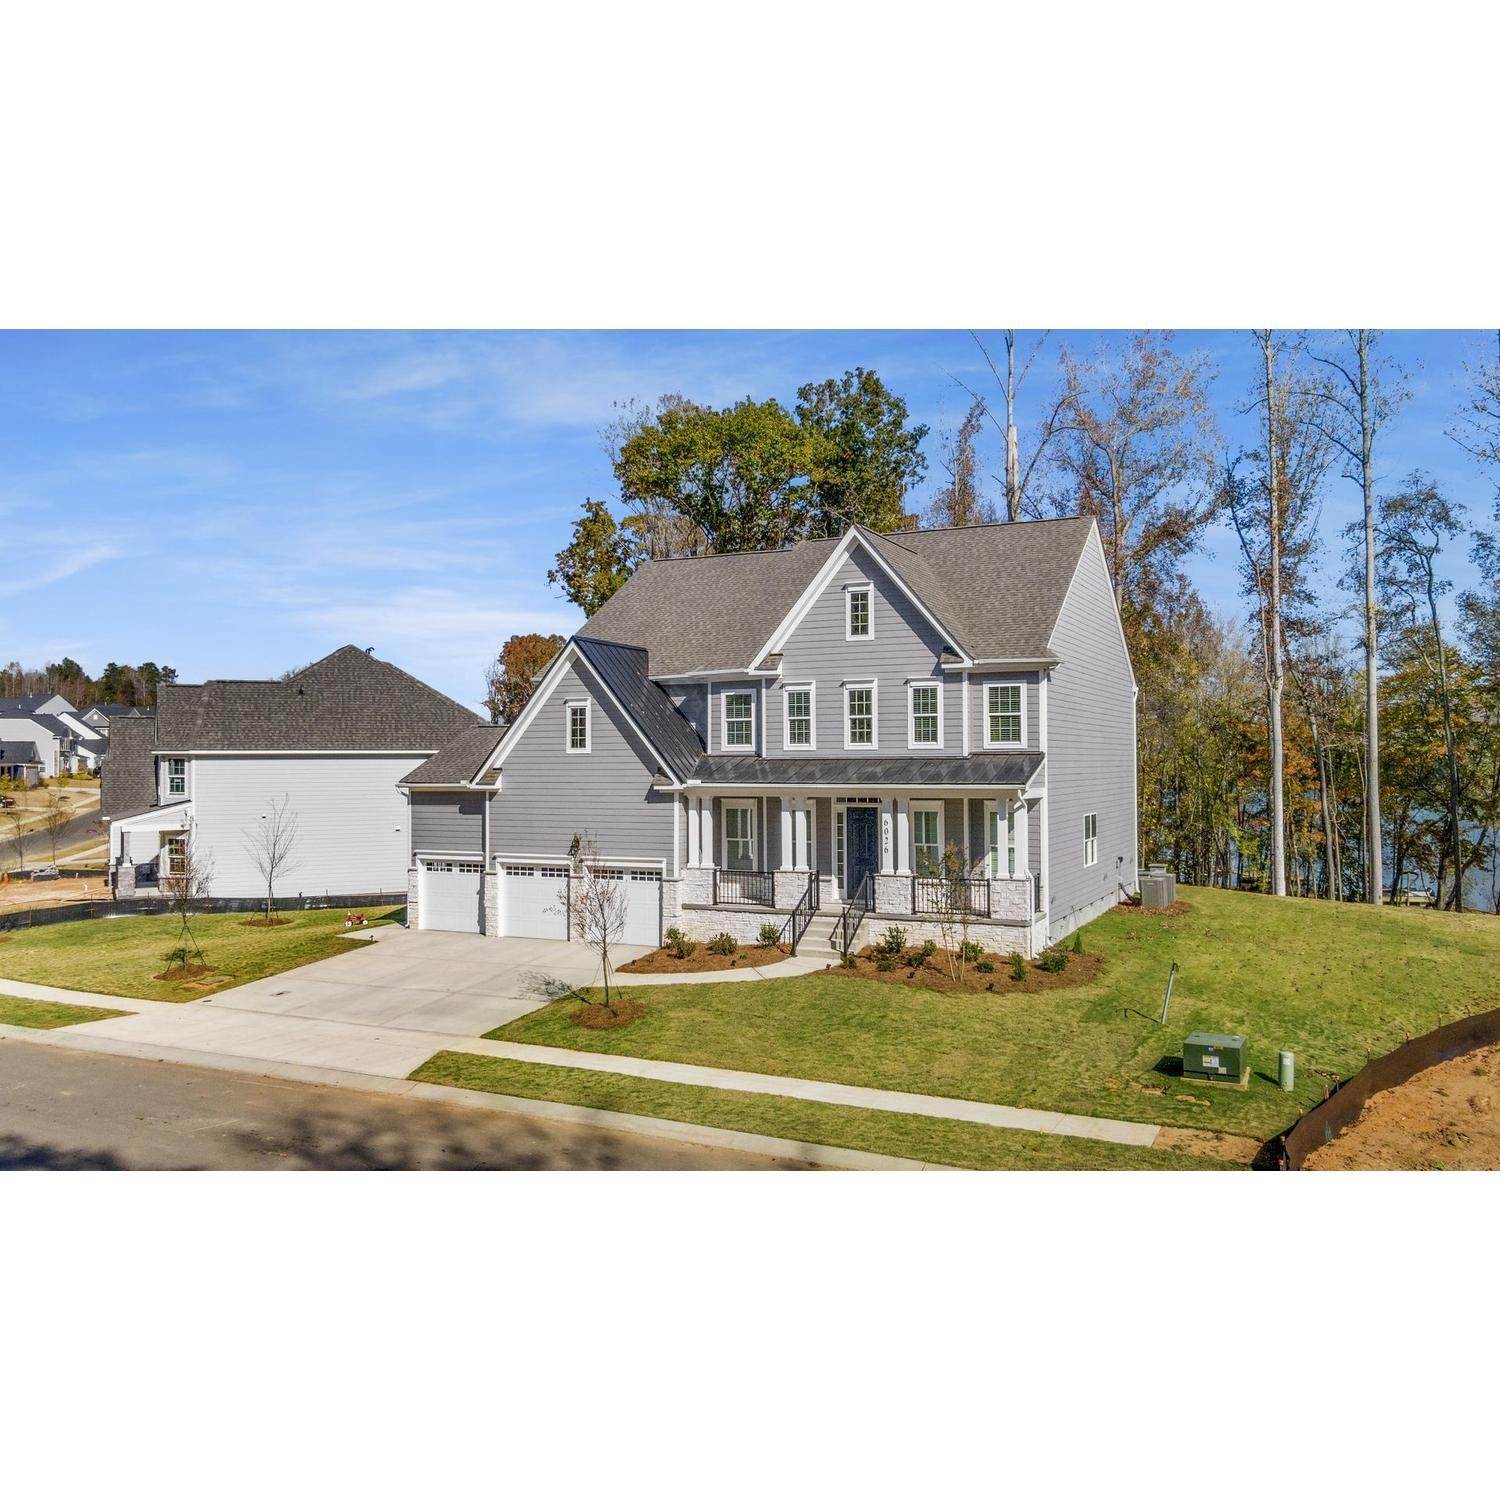 13. Waterfront at The Vineyards on Lake Wylie κτίριο σε 6200 Jepson Ct, Charlotte, NC 28214